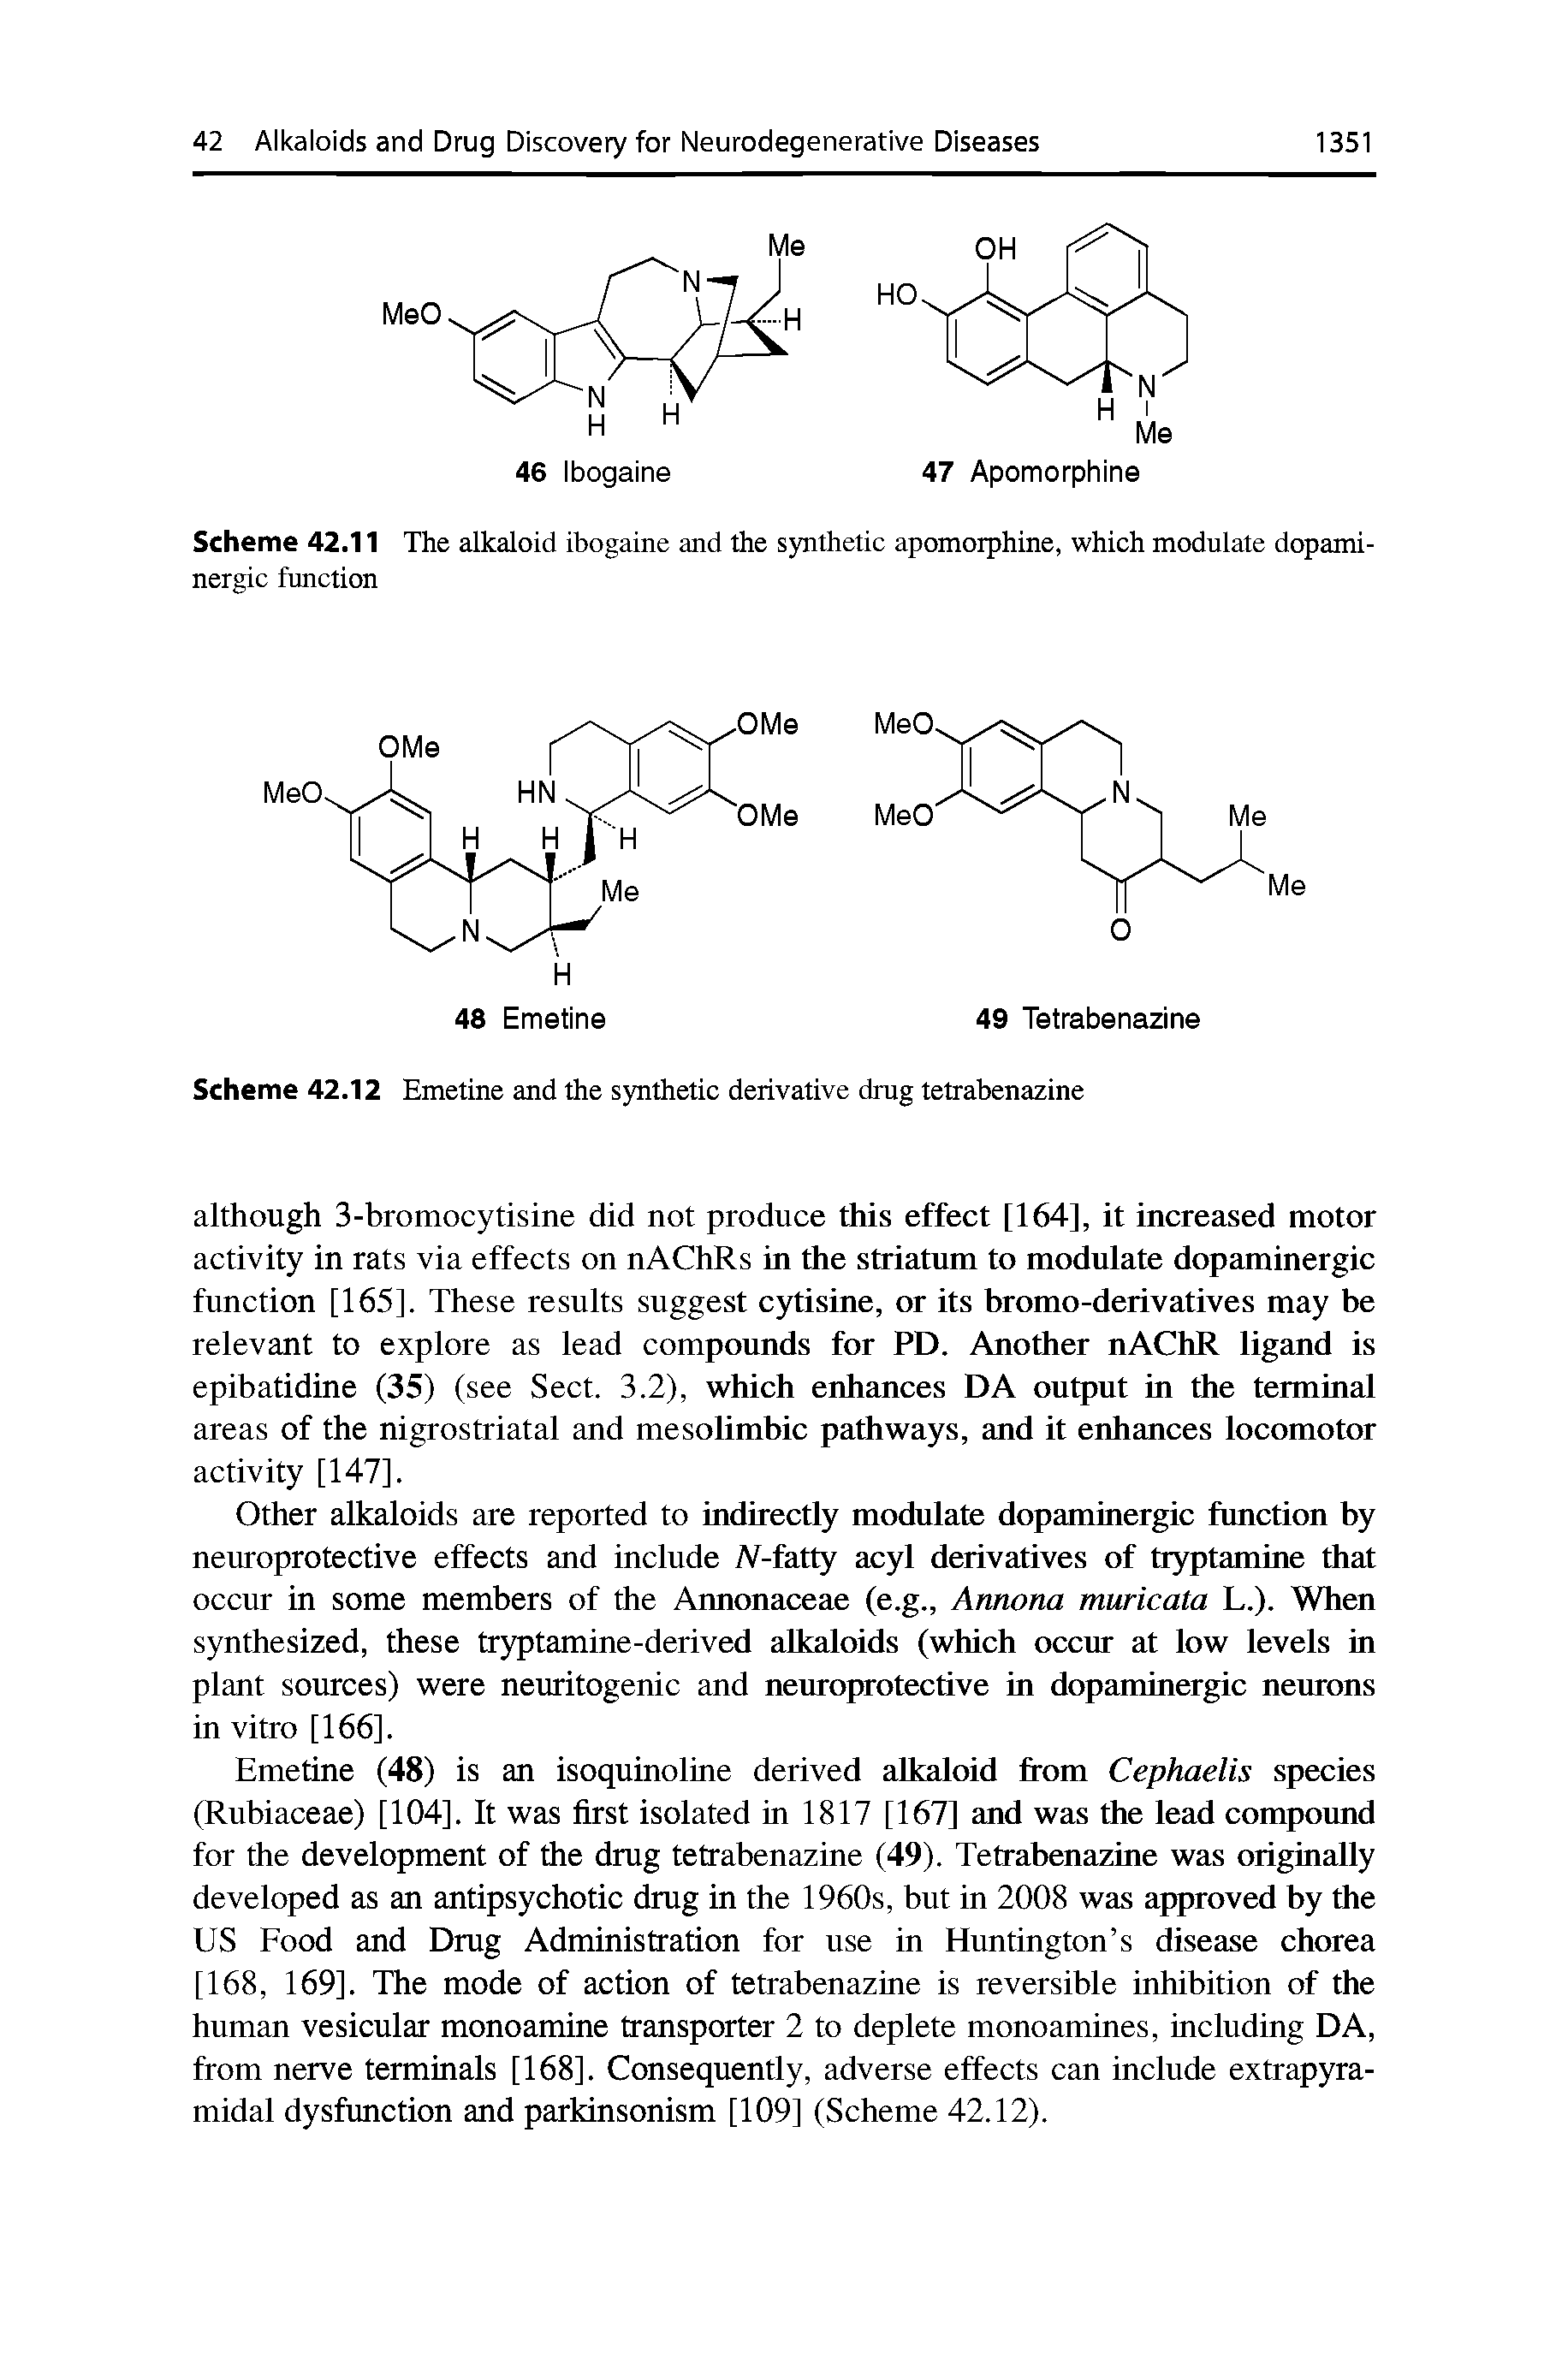 Scheme 42.11 The alkaloid ibogaine and the synthetic apomorphine, which modulate dopaminergic function...